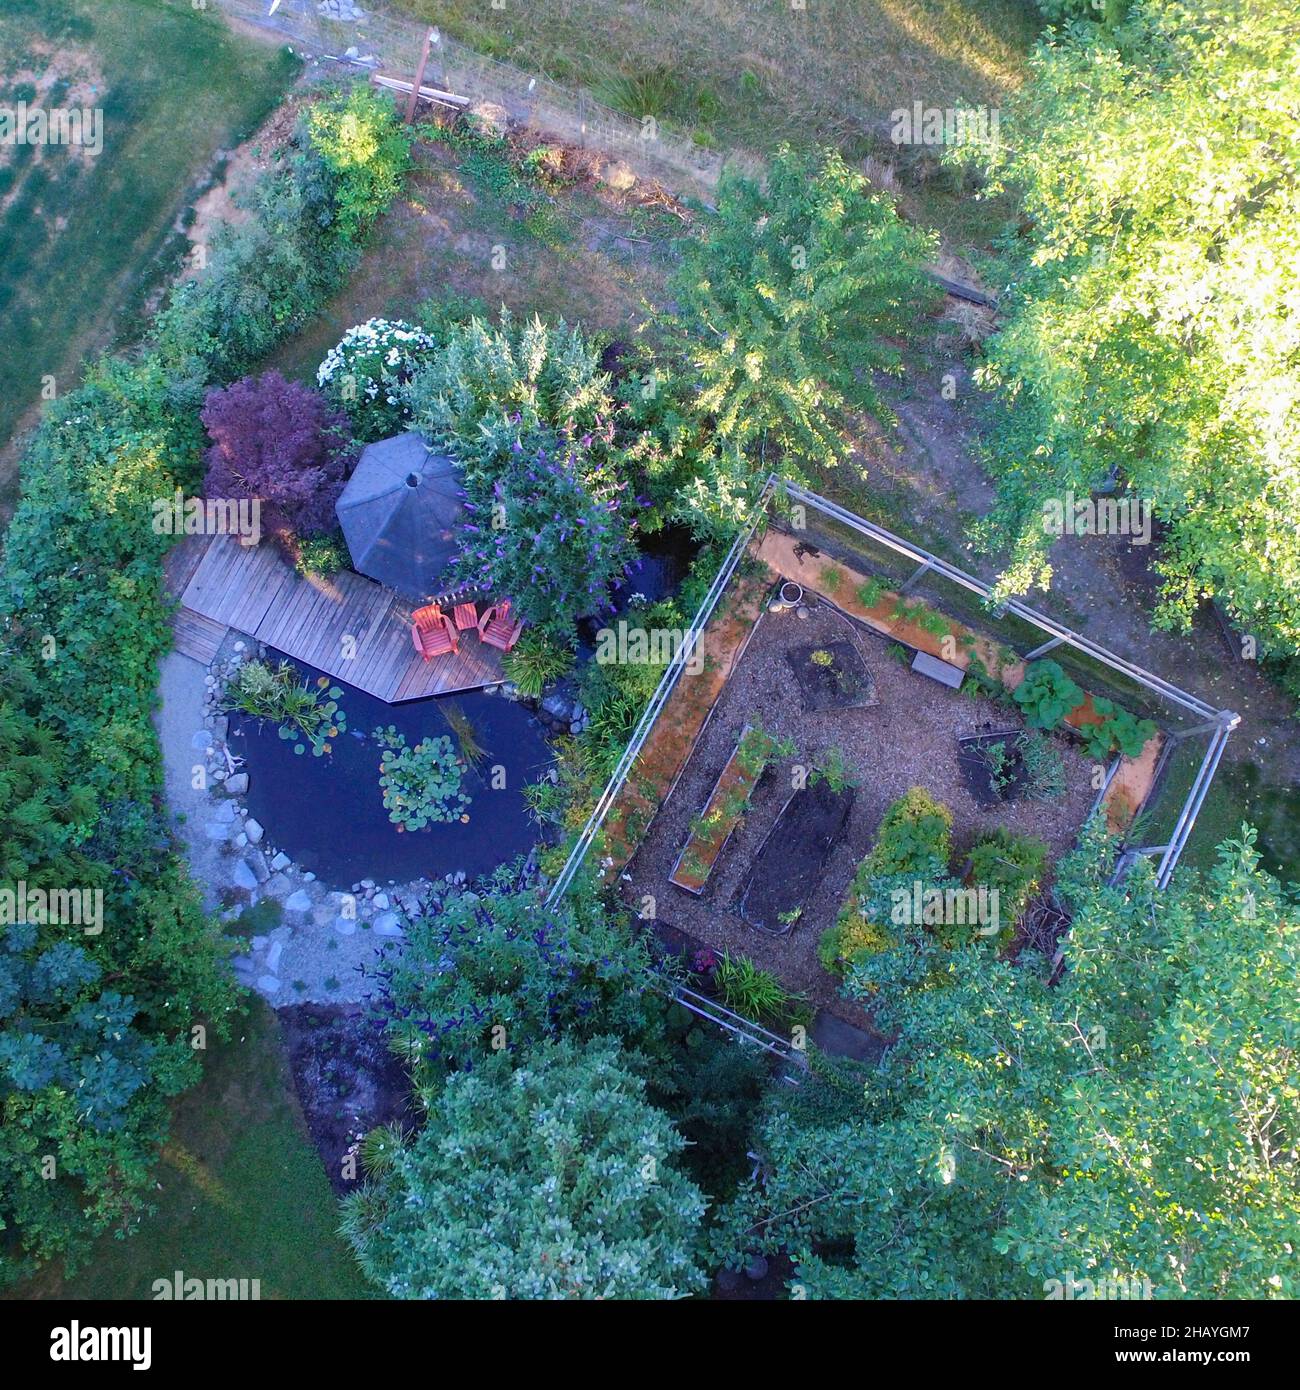 Aerial view of a garden, vegetable patch and decking by a pond, British Columbia, Canada Stock Photo